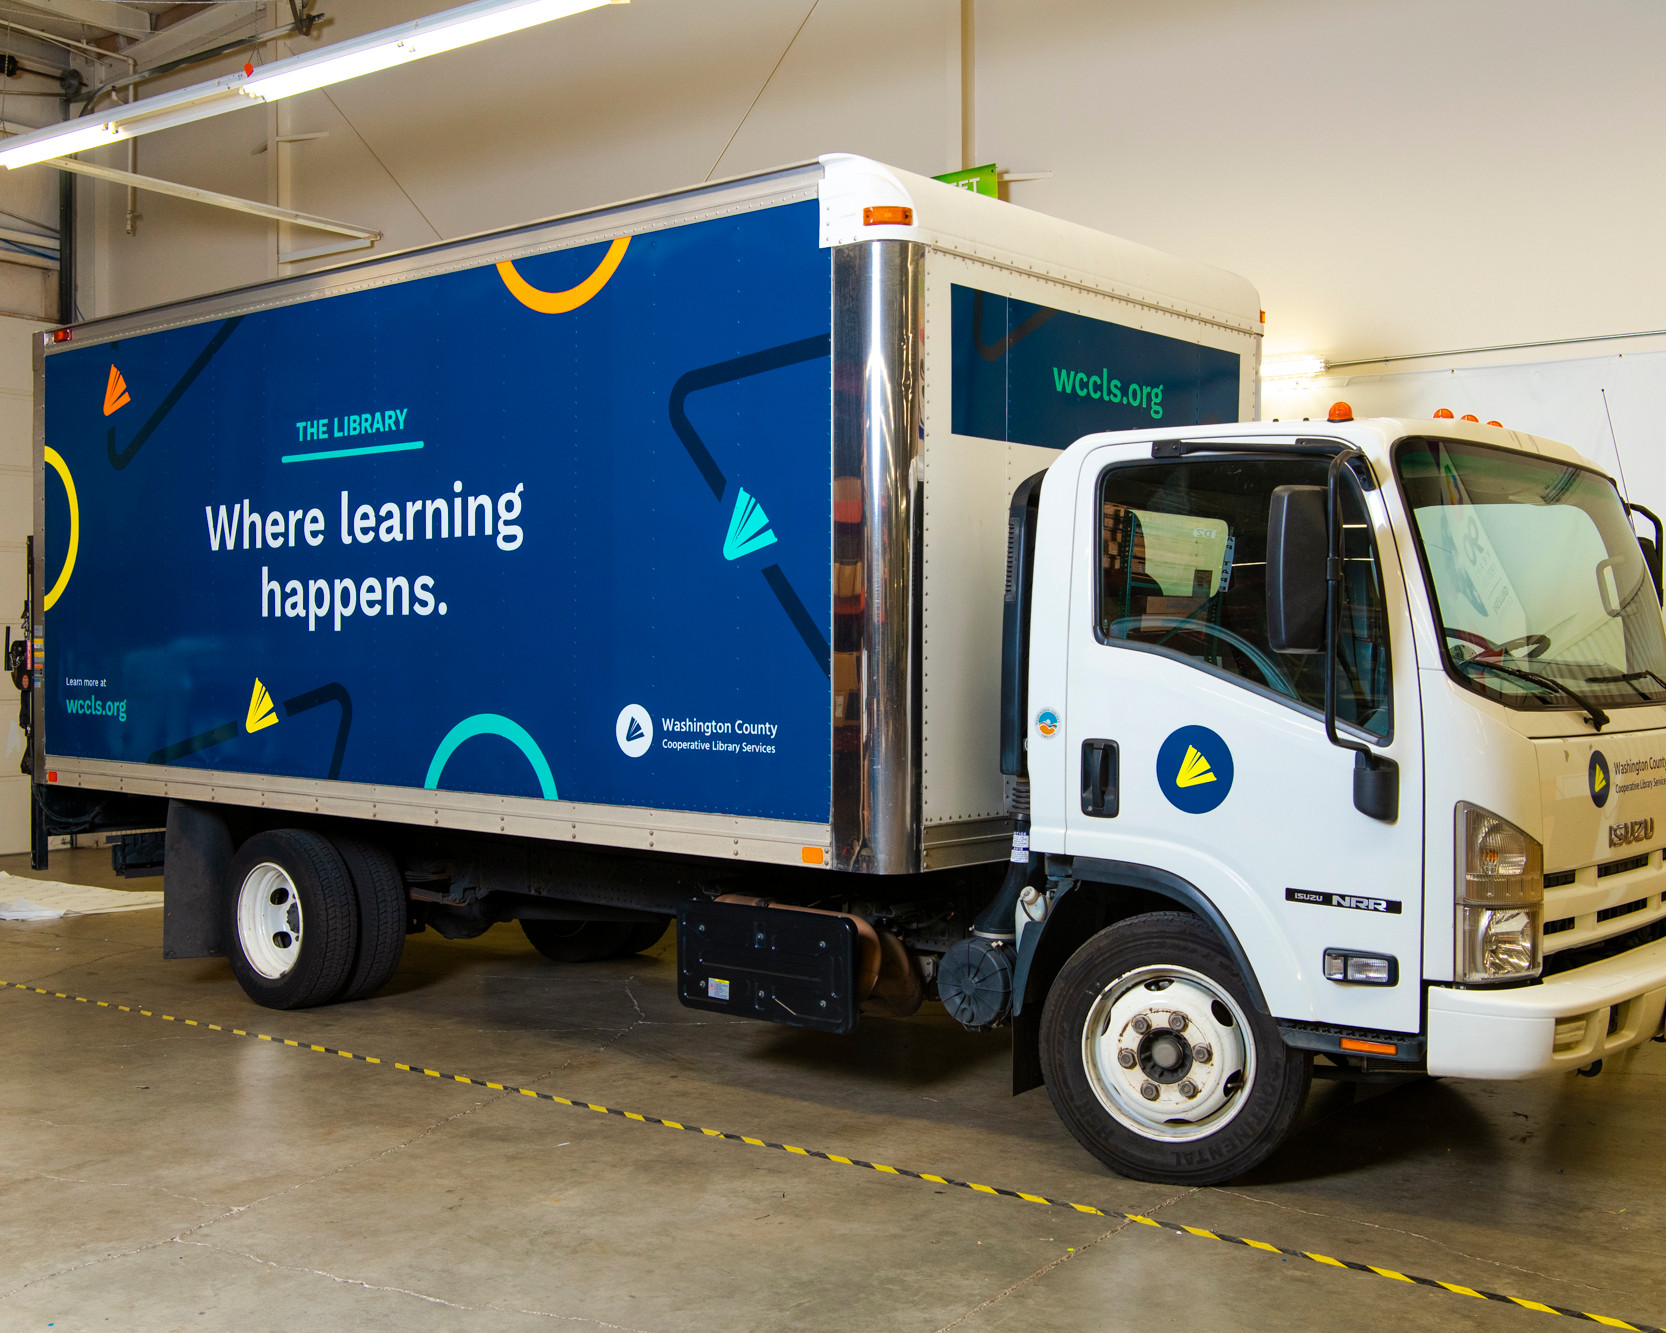 WCCLS courier truck that says "Where learning happens."